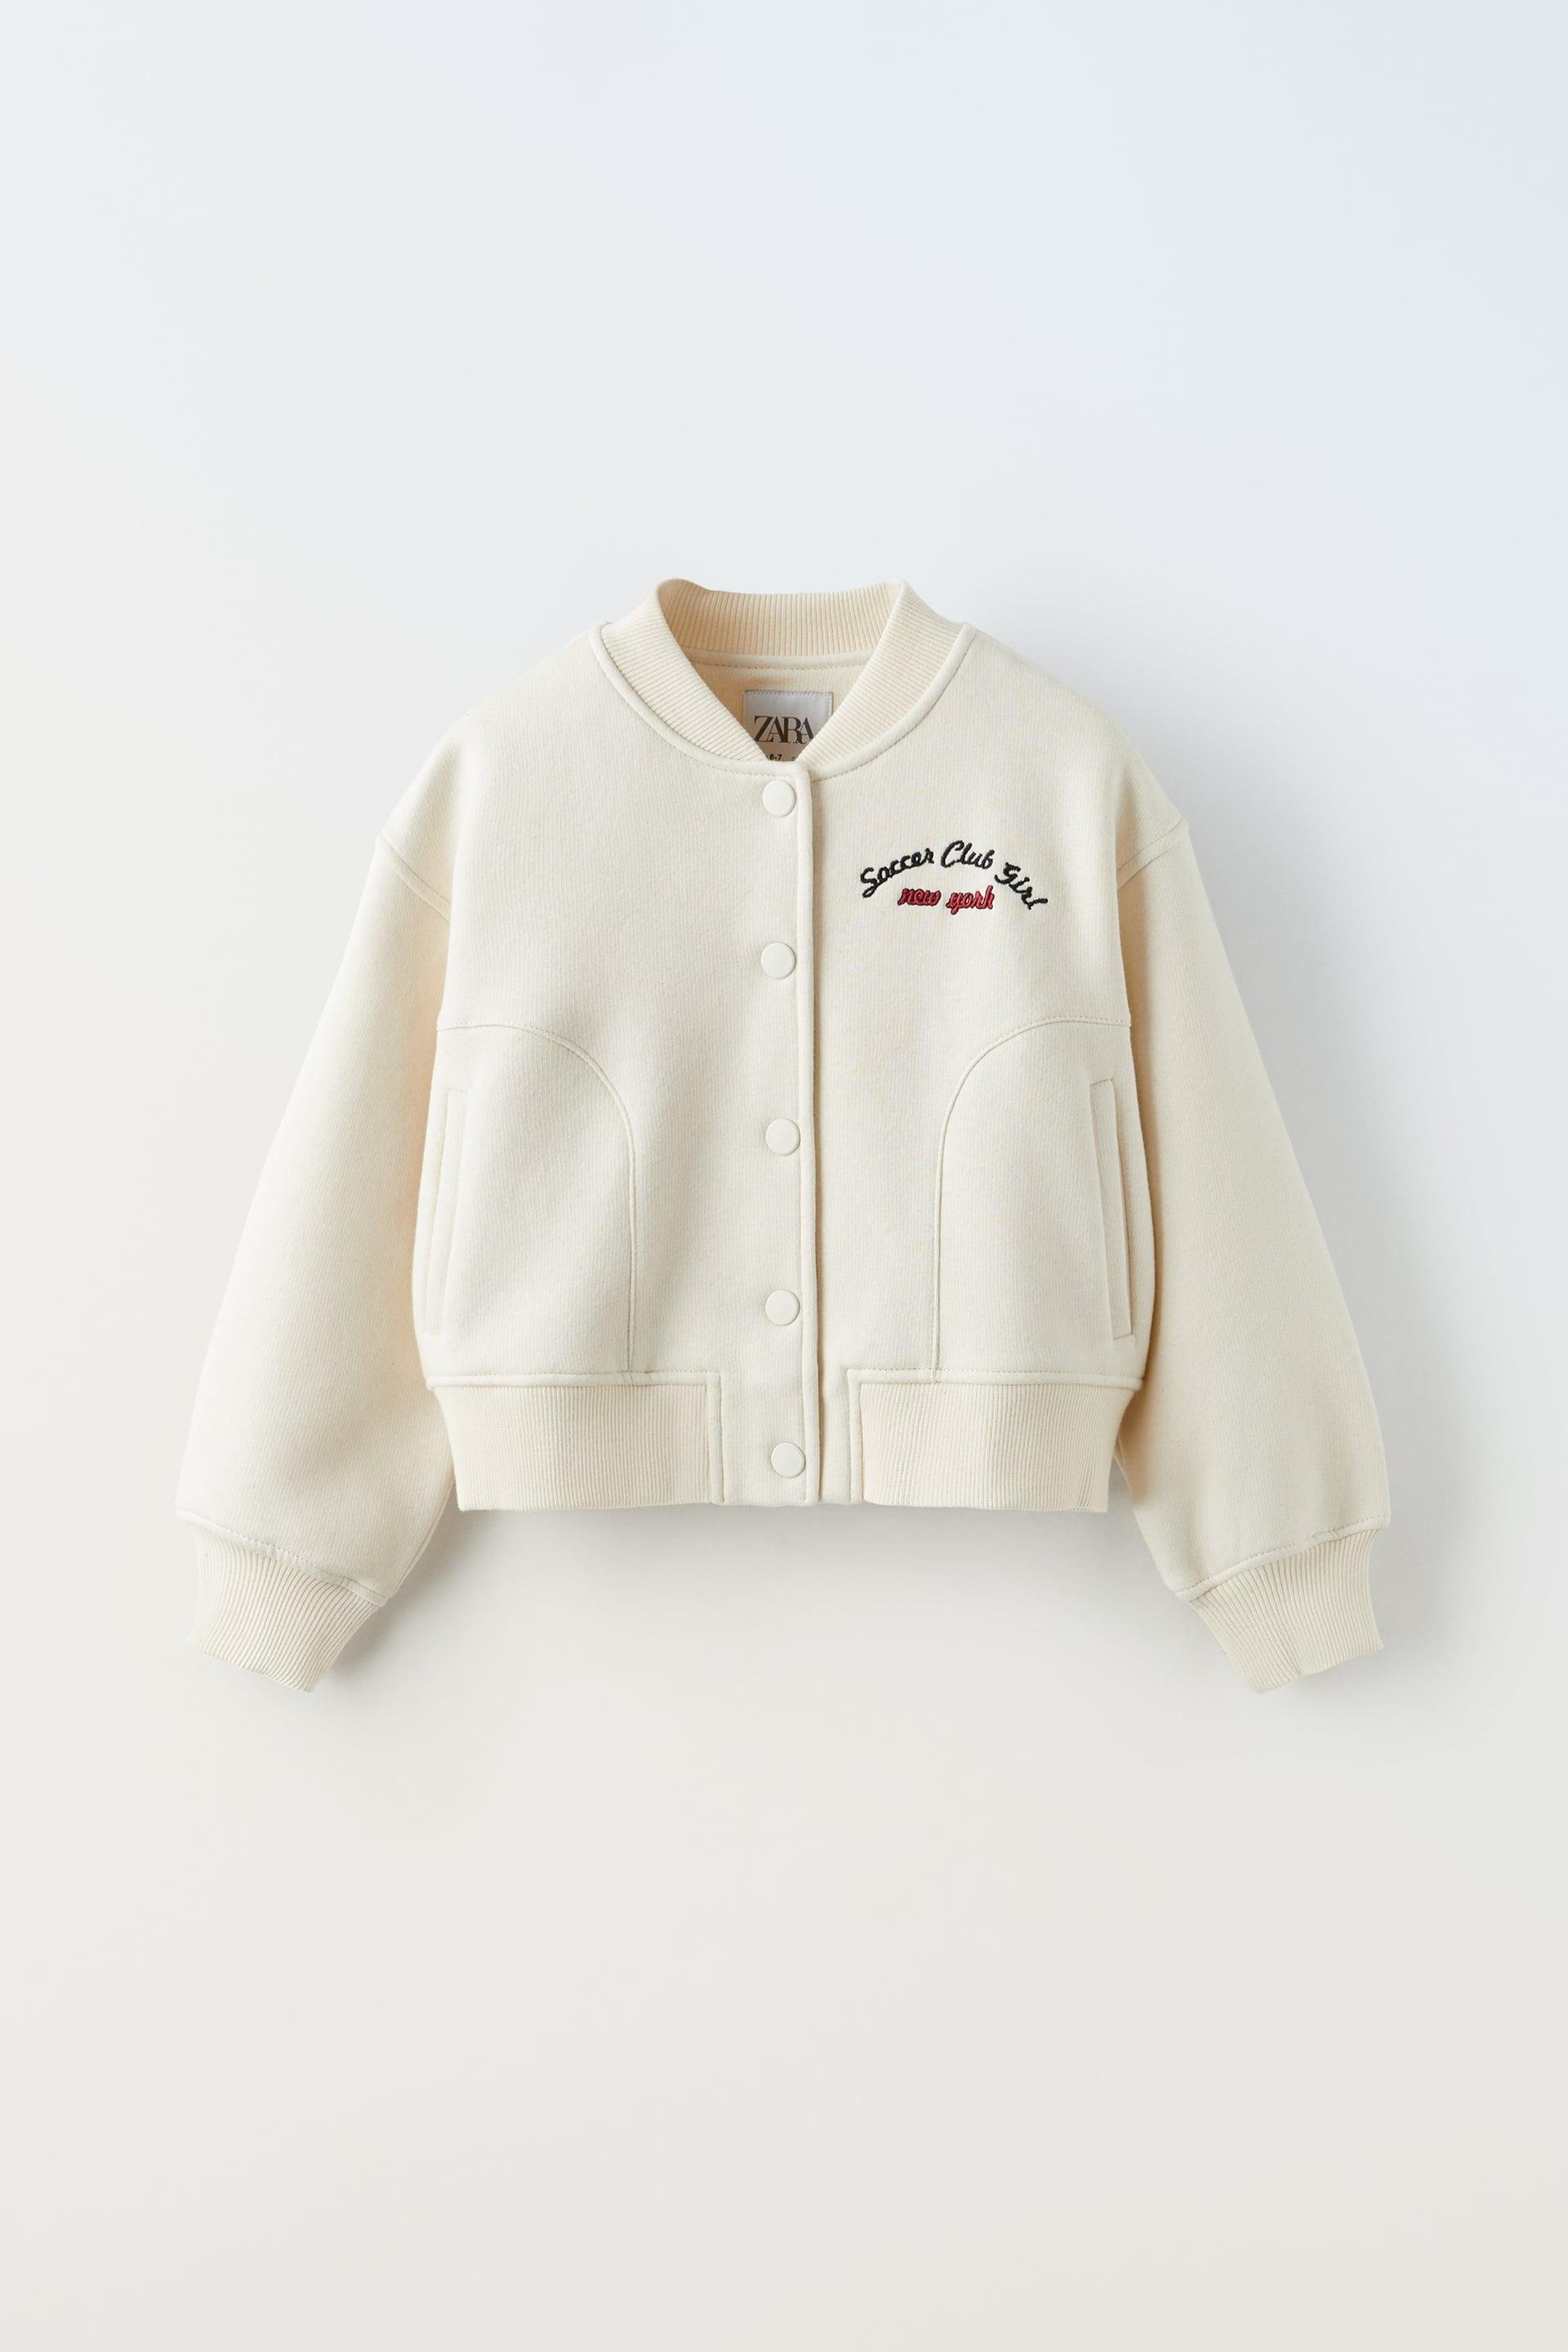 EMBROIDERED COLLEGE BOMBER by ZARA